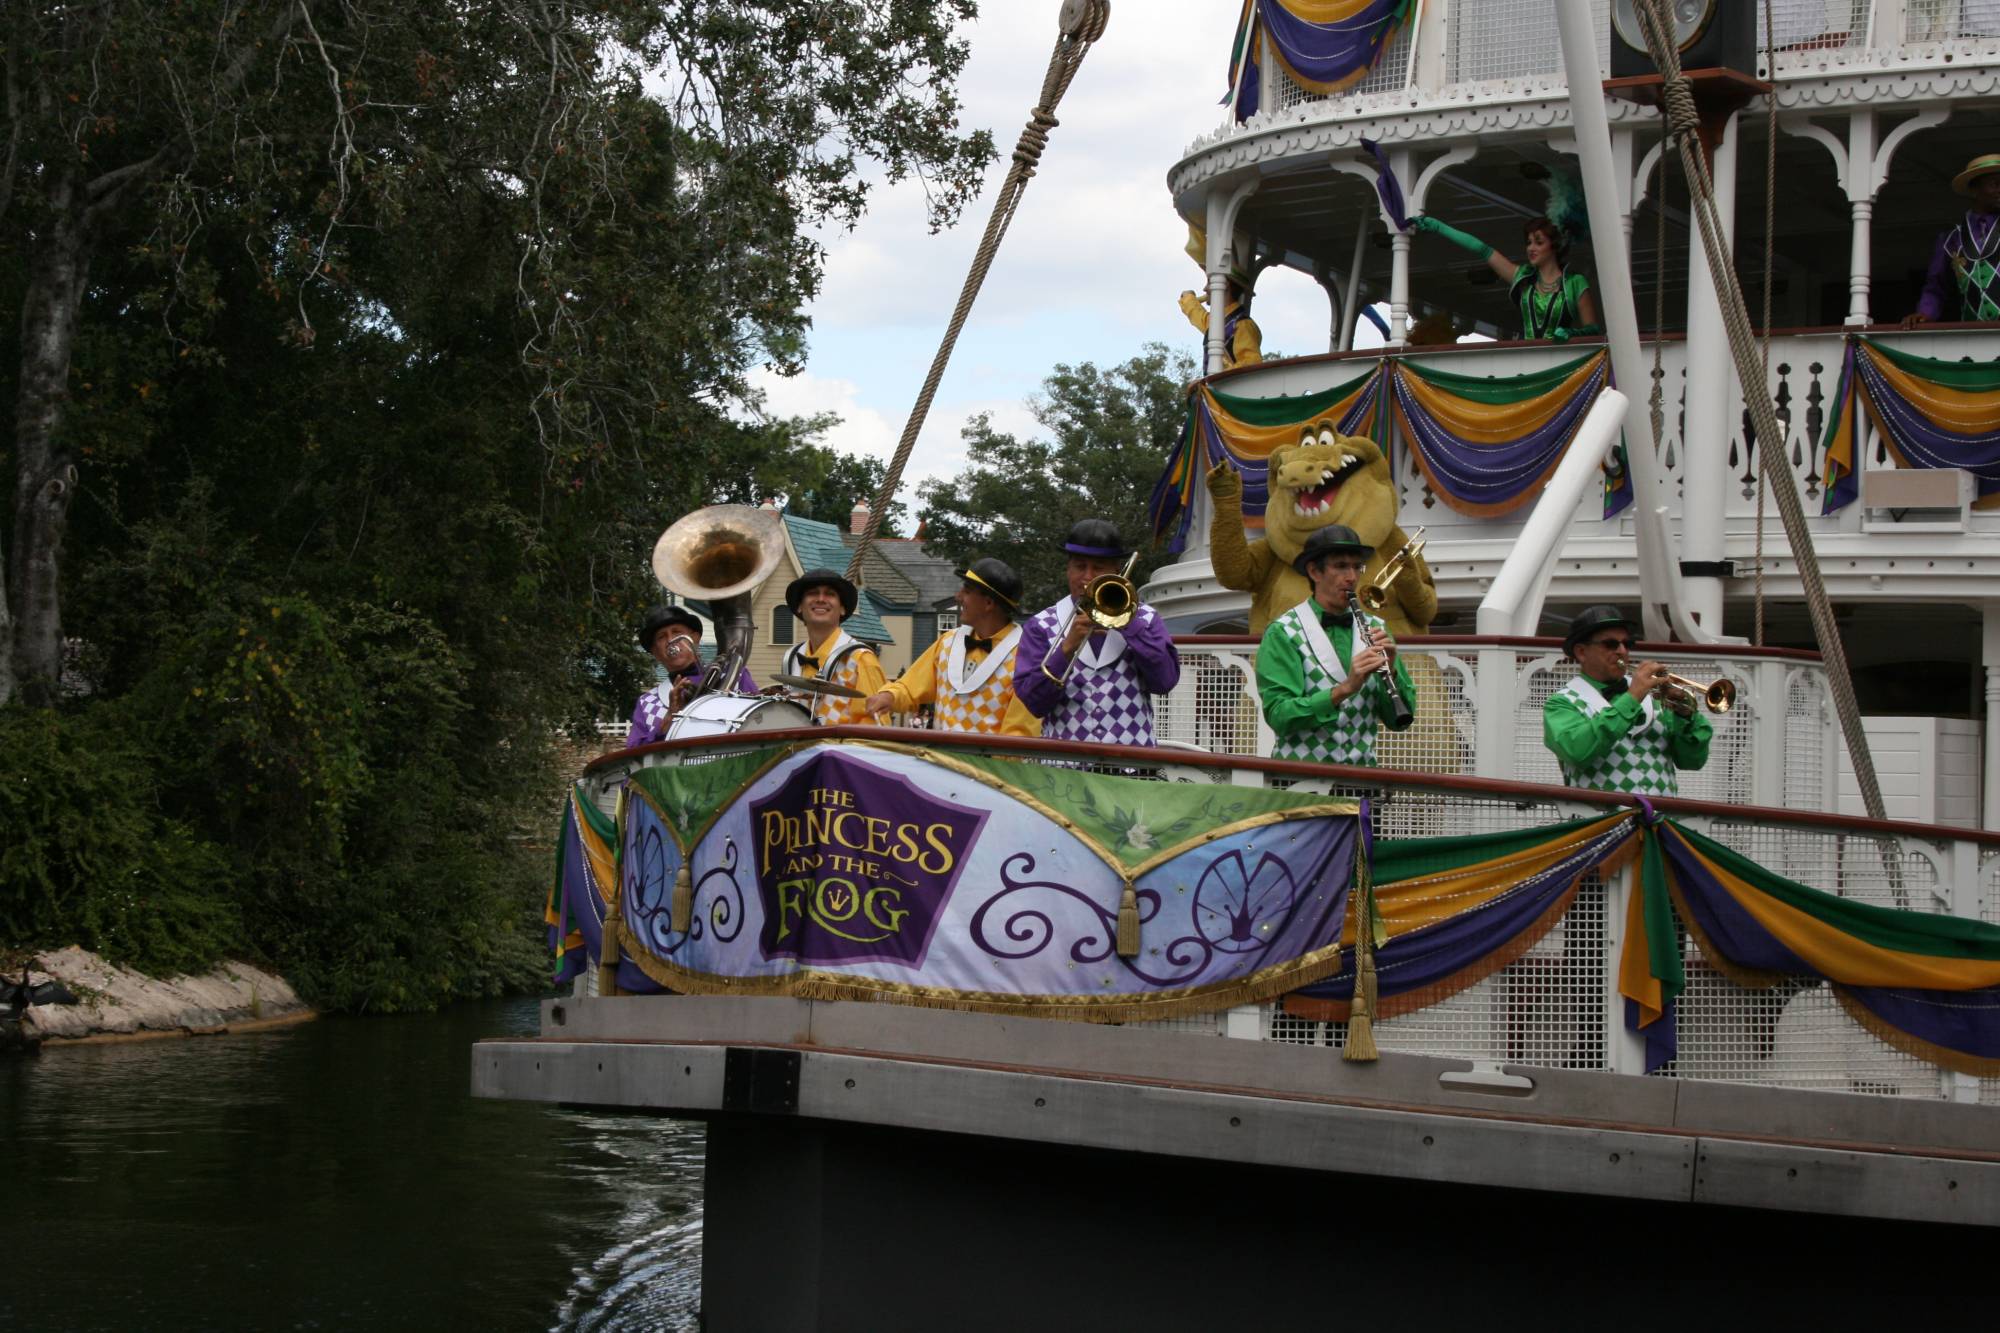 The Princess and the Frog Riverboat Show